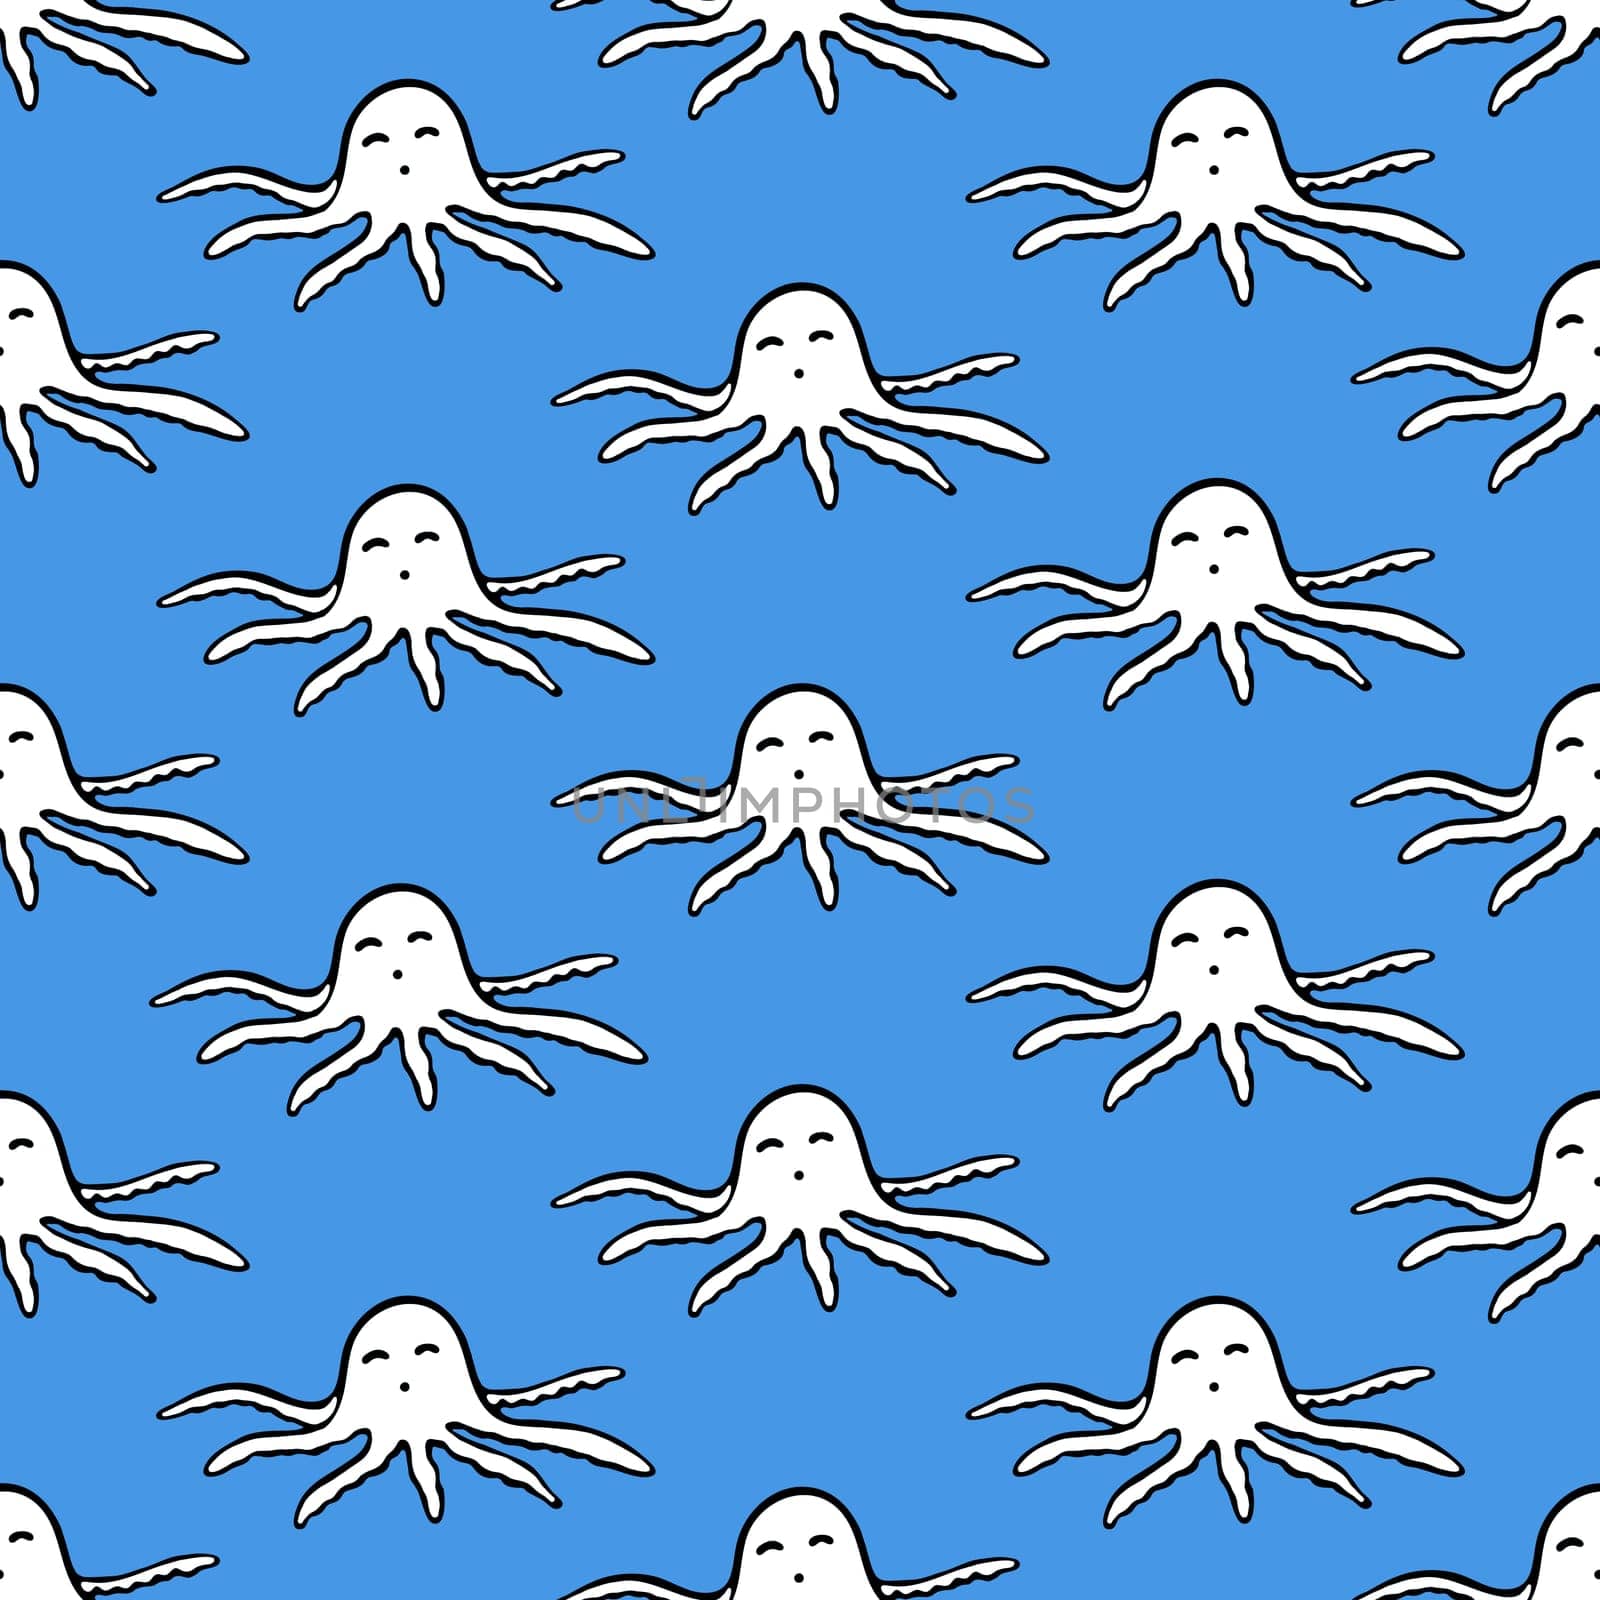 Octopus Seamless Pattern. Background for Kids with Hand Drawn Doodle Cute Octopus. Cartoon Sea Animals Simple Illustration.